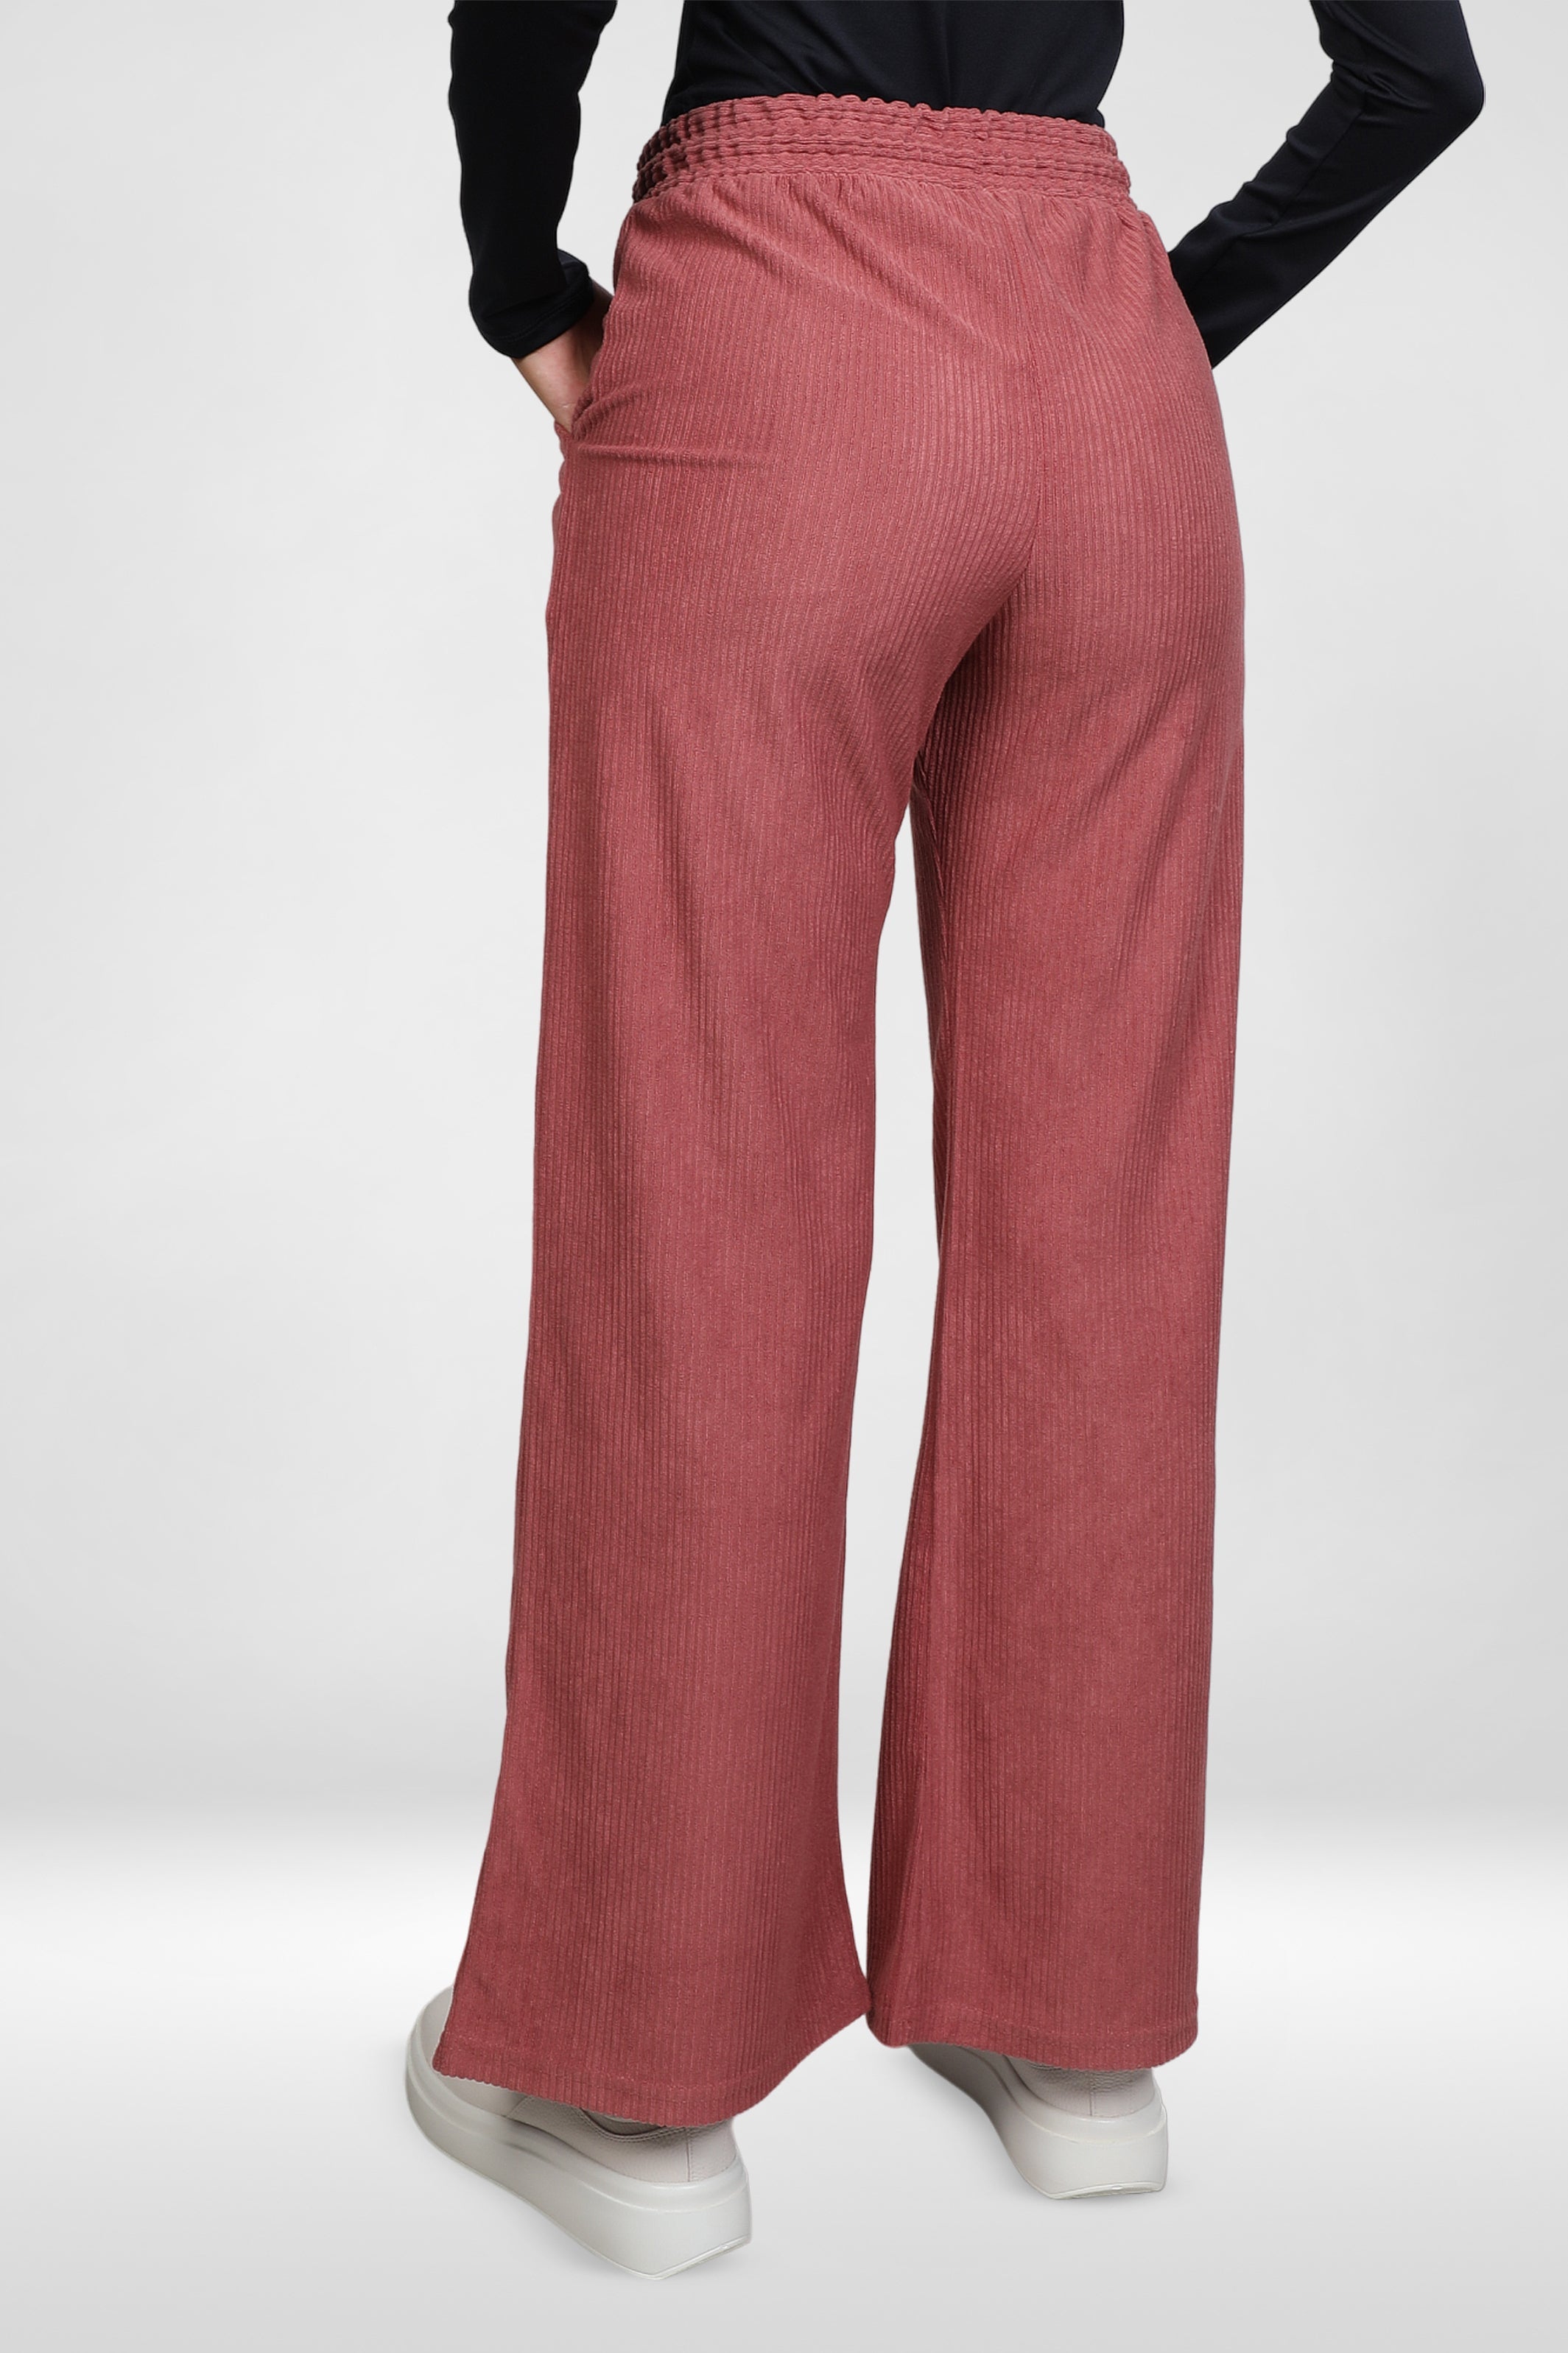 Women Lined Patterned Somo Pants